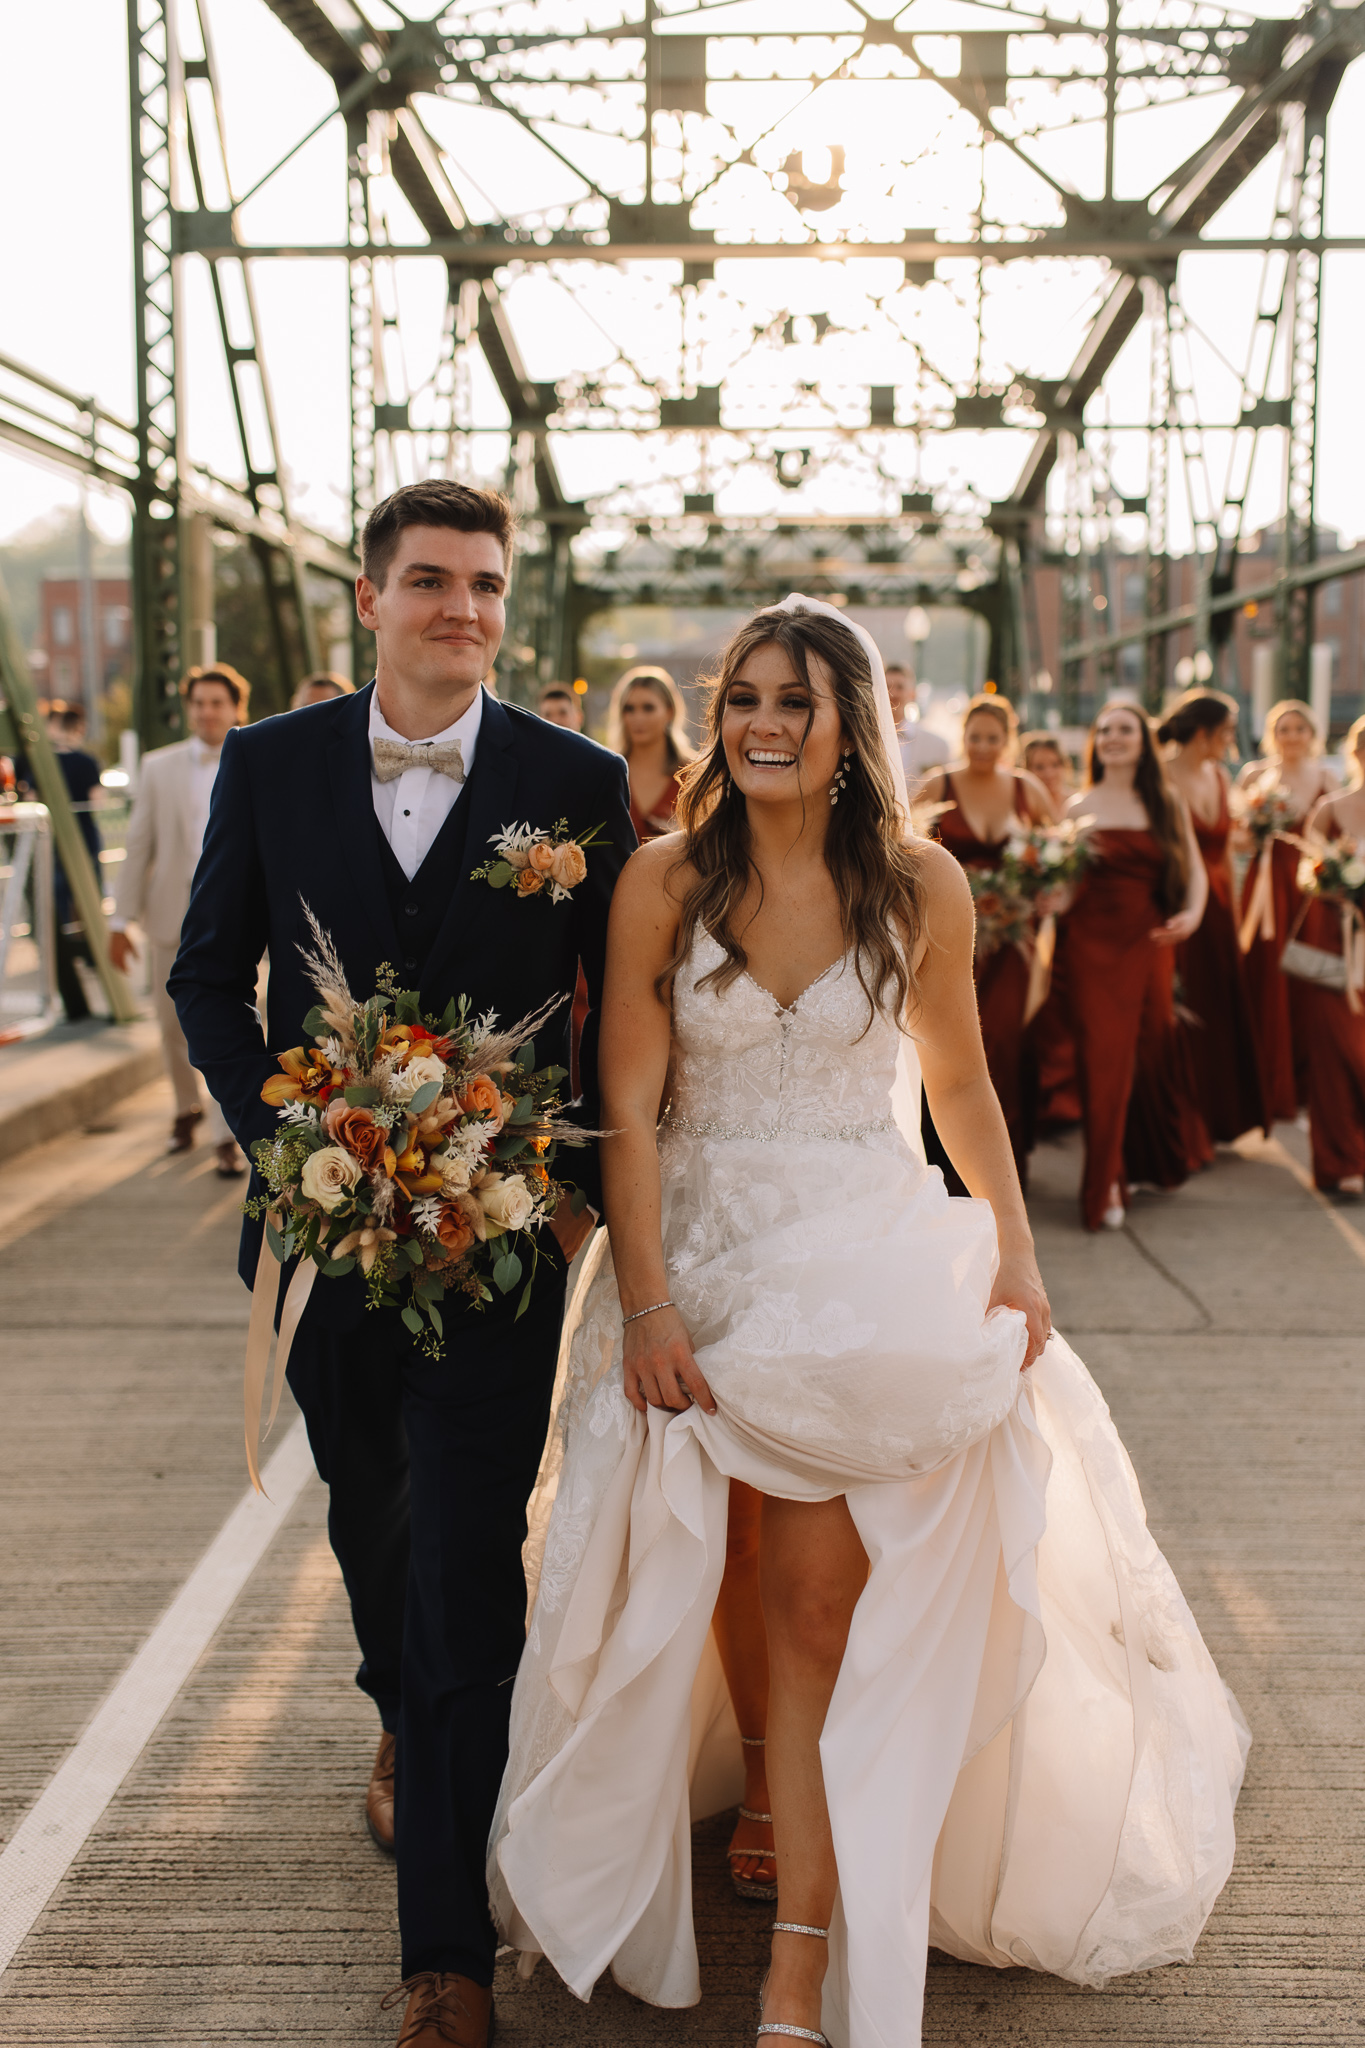 Bride and groom walking down the Stillwater bridge laughing during golden hour as their wedding party follows close behind them